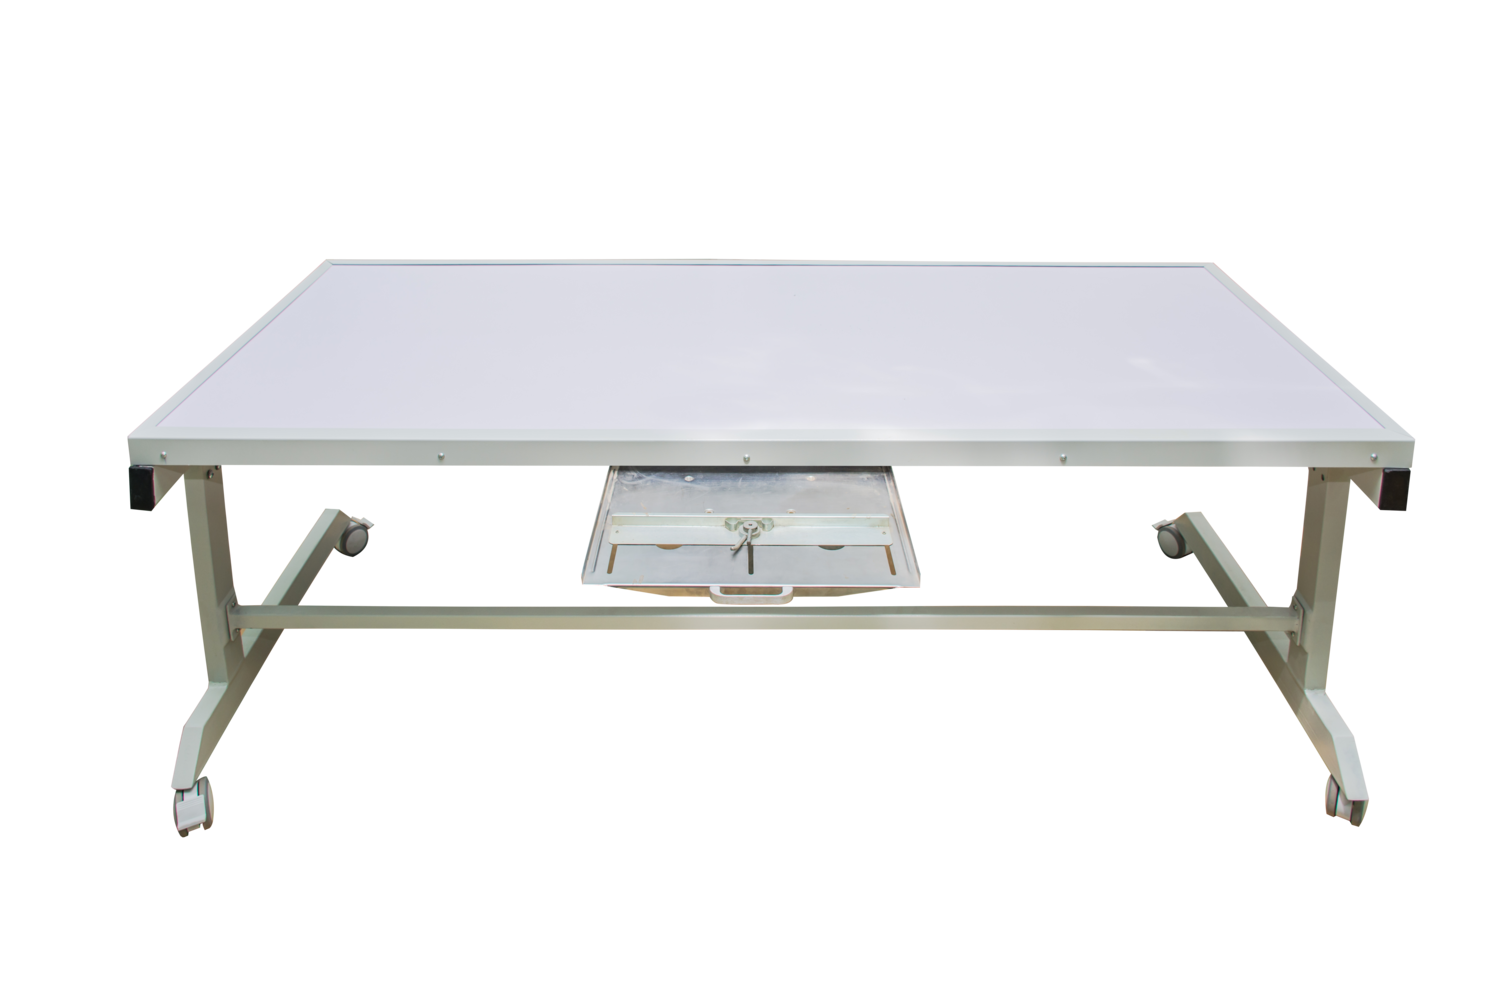 4-way elevating table specifications (RT600)